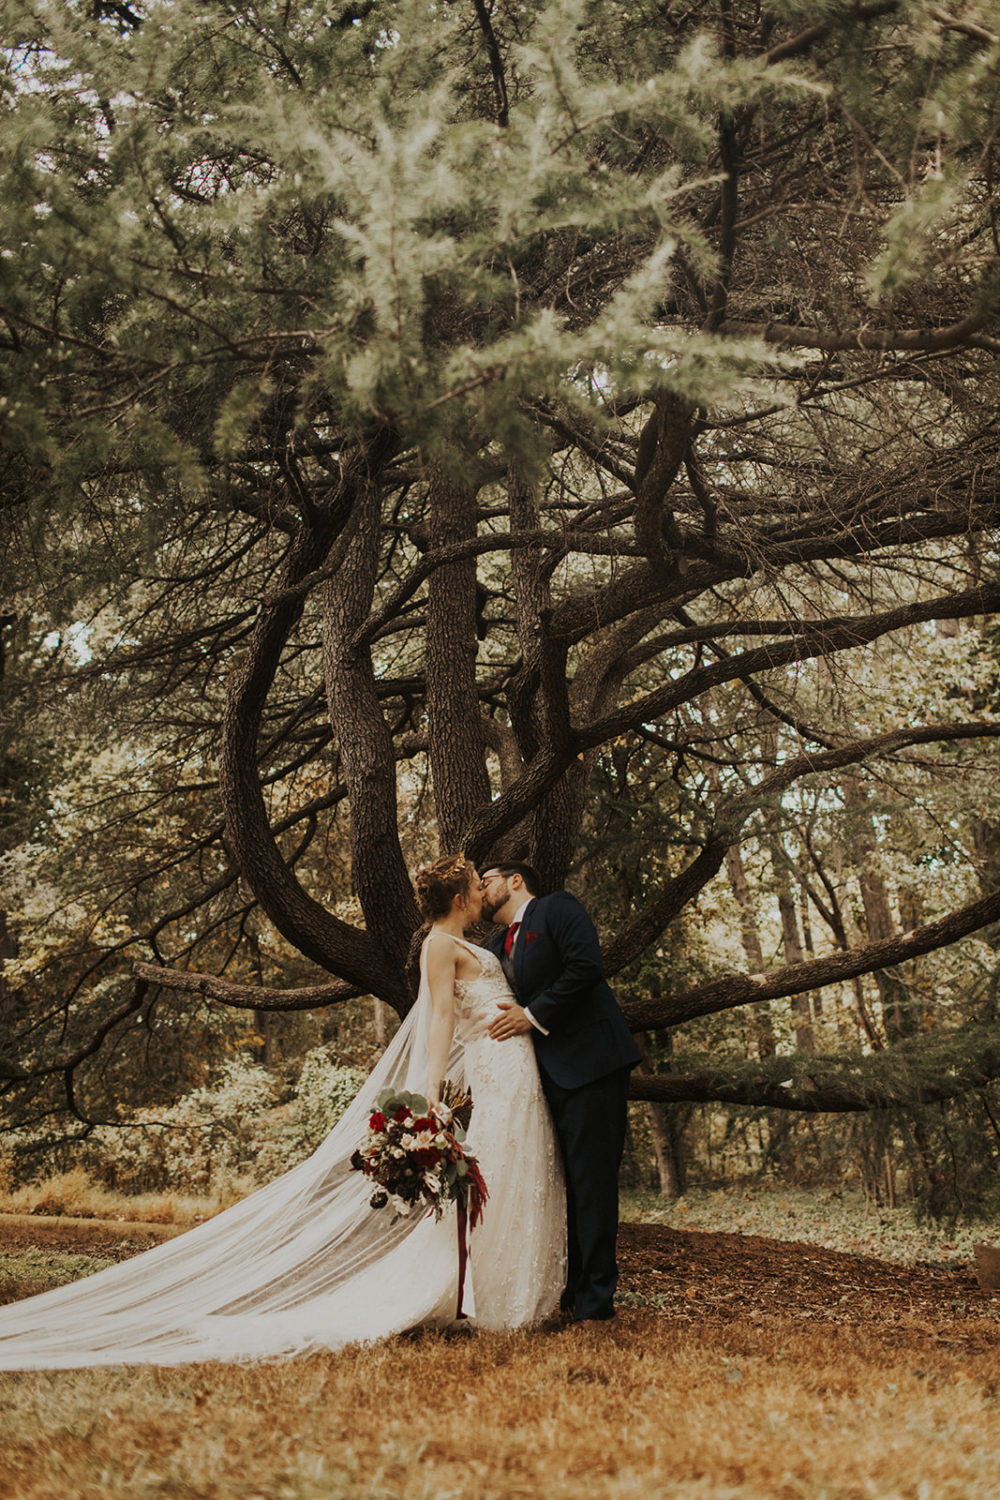 Couple kisses under tree in forest wedding first look